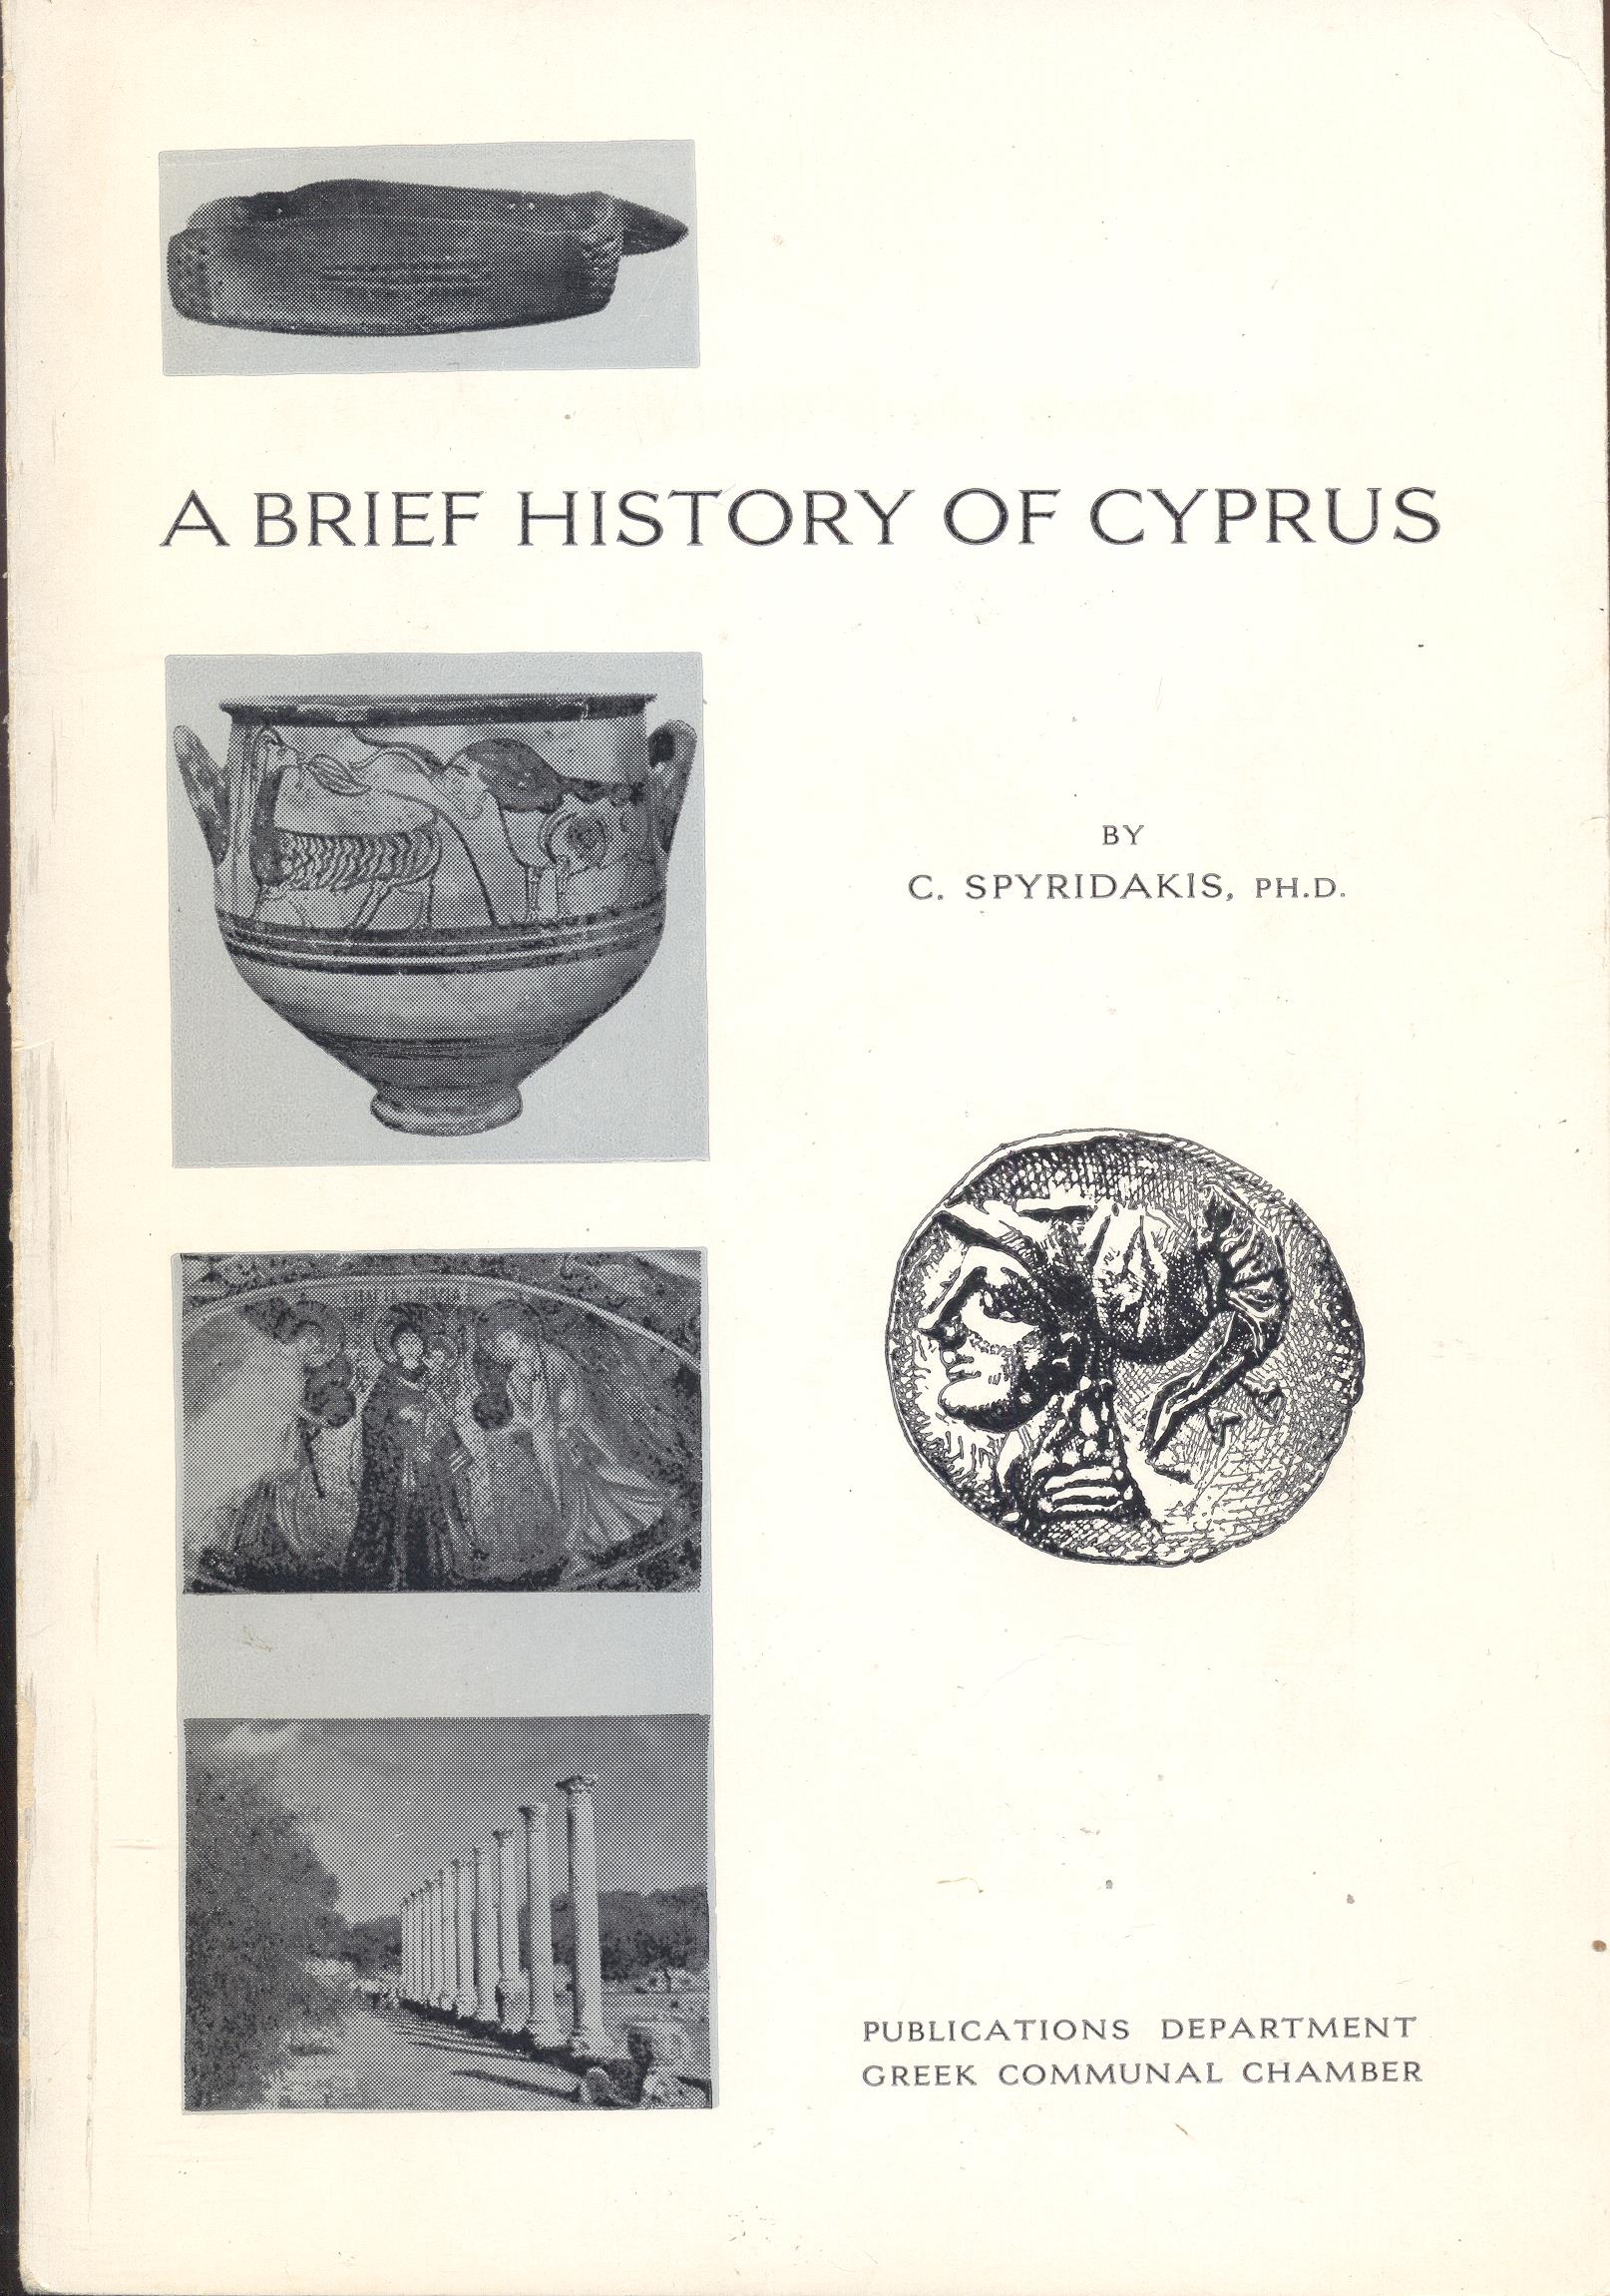 A BRIEF HISTORY OF CYPRUS